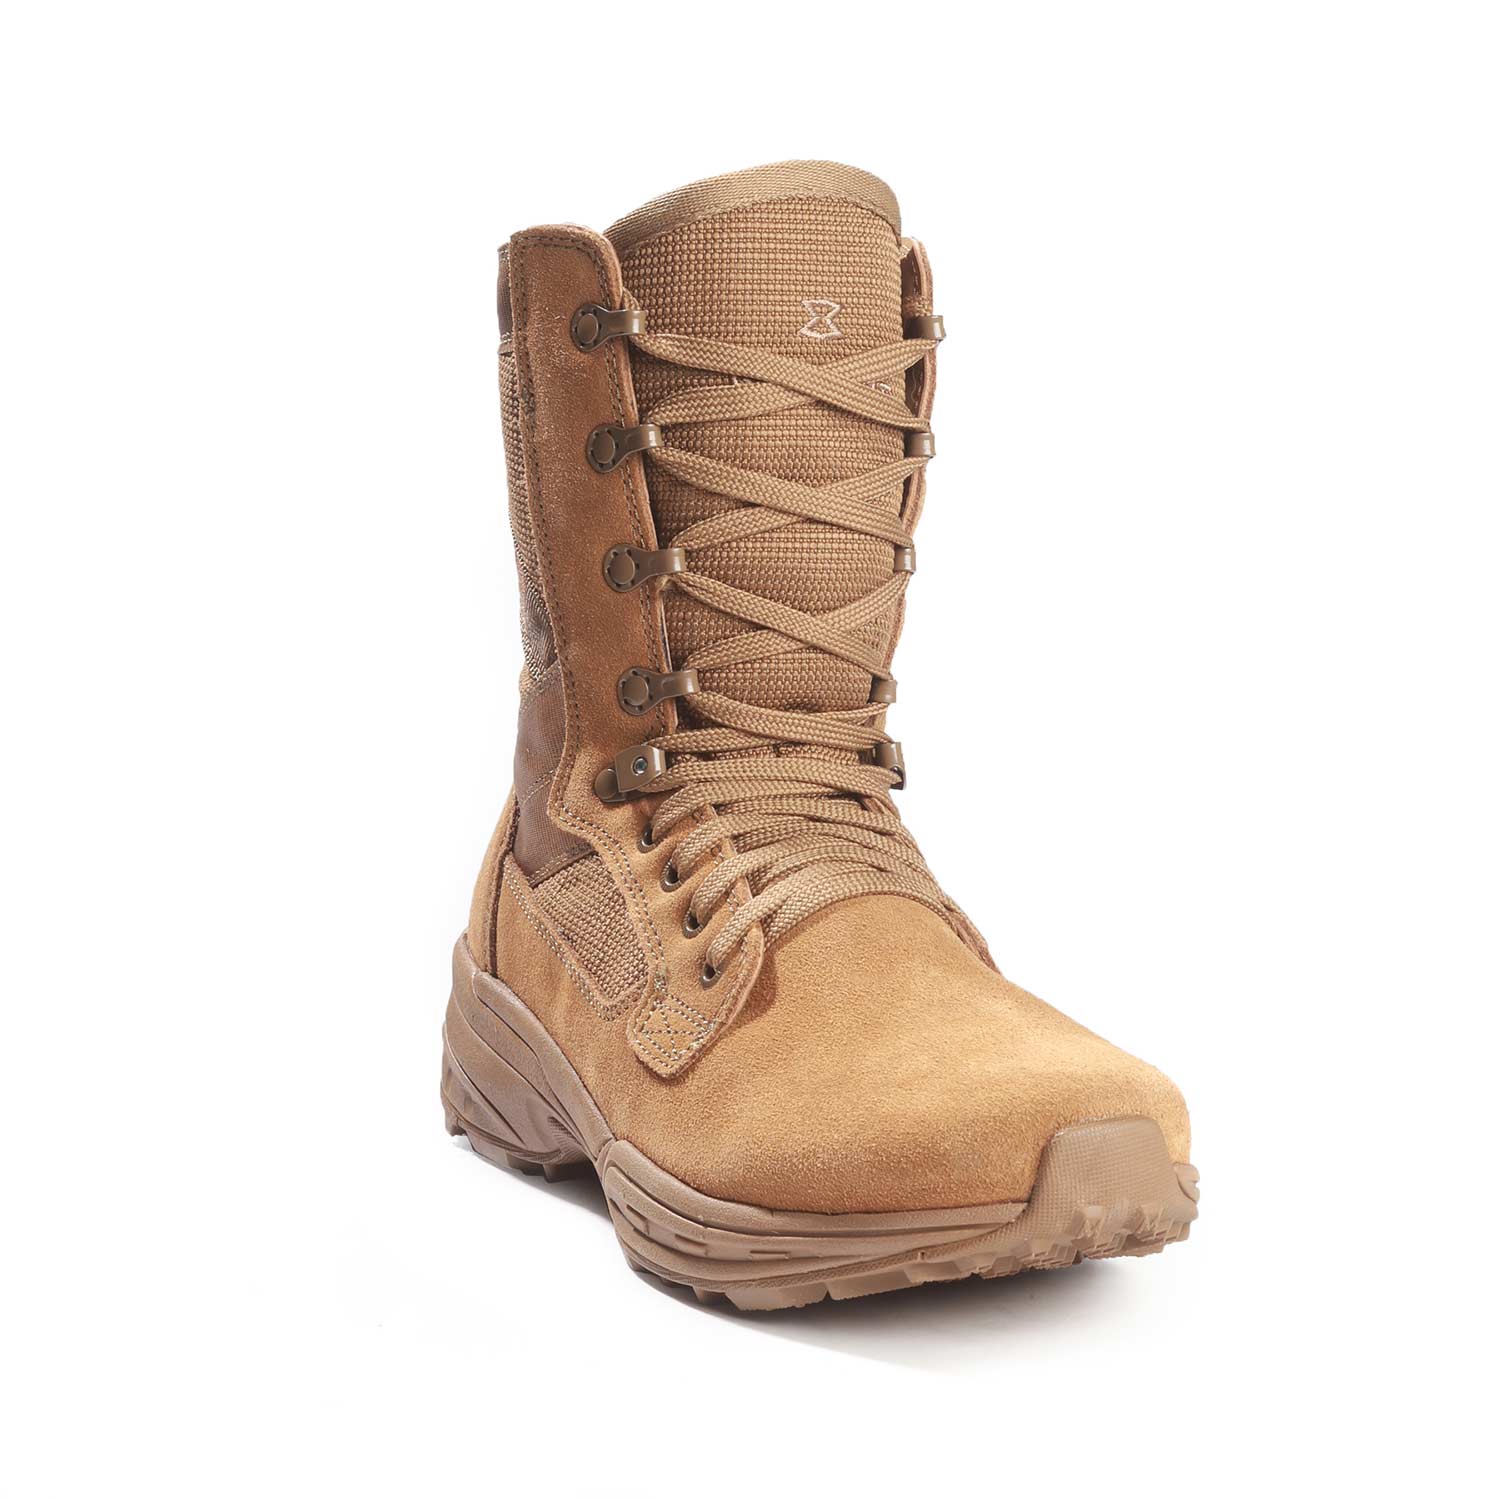 Garmont T8 NFS Boot (OCP Coyote)